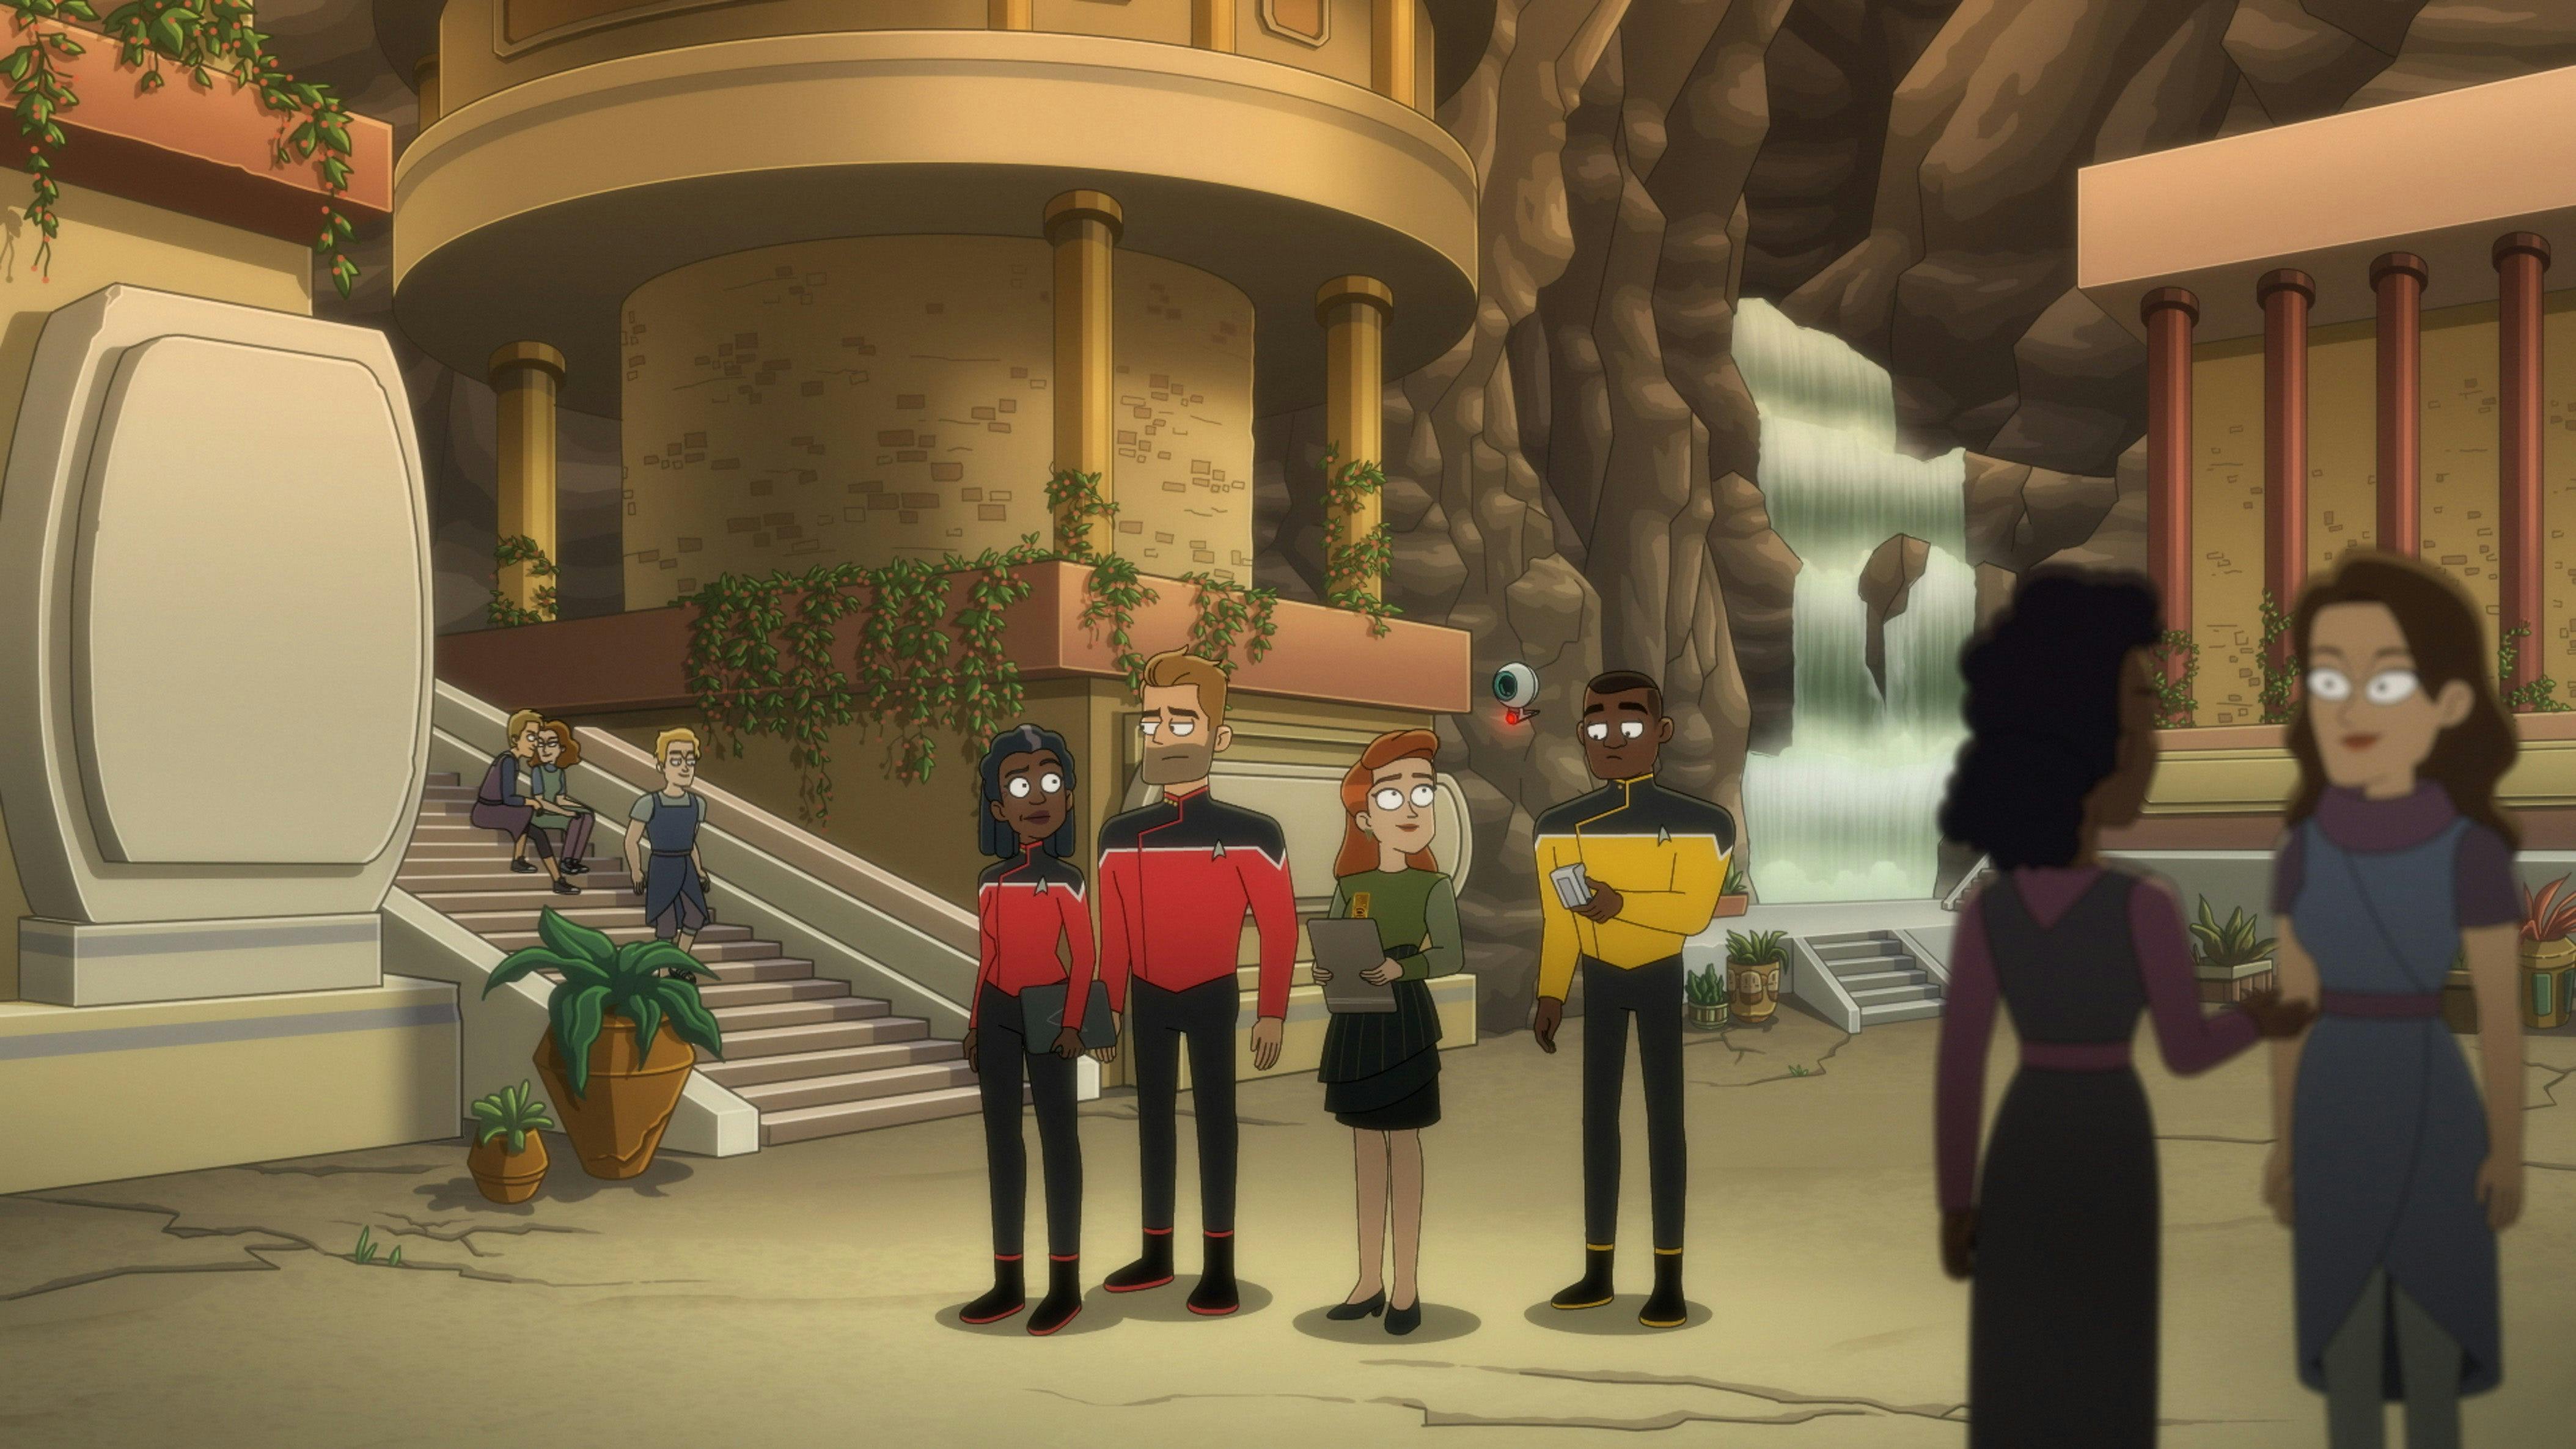 Captain Freeman, Commander Rutherford, and an ensign - along with a reporter - beam down to a planet.